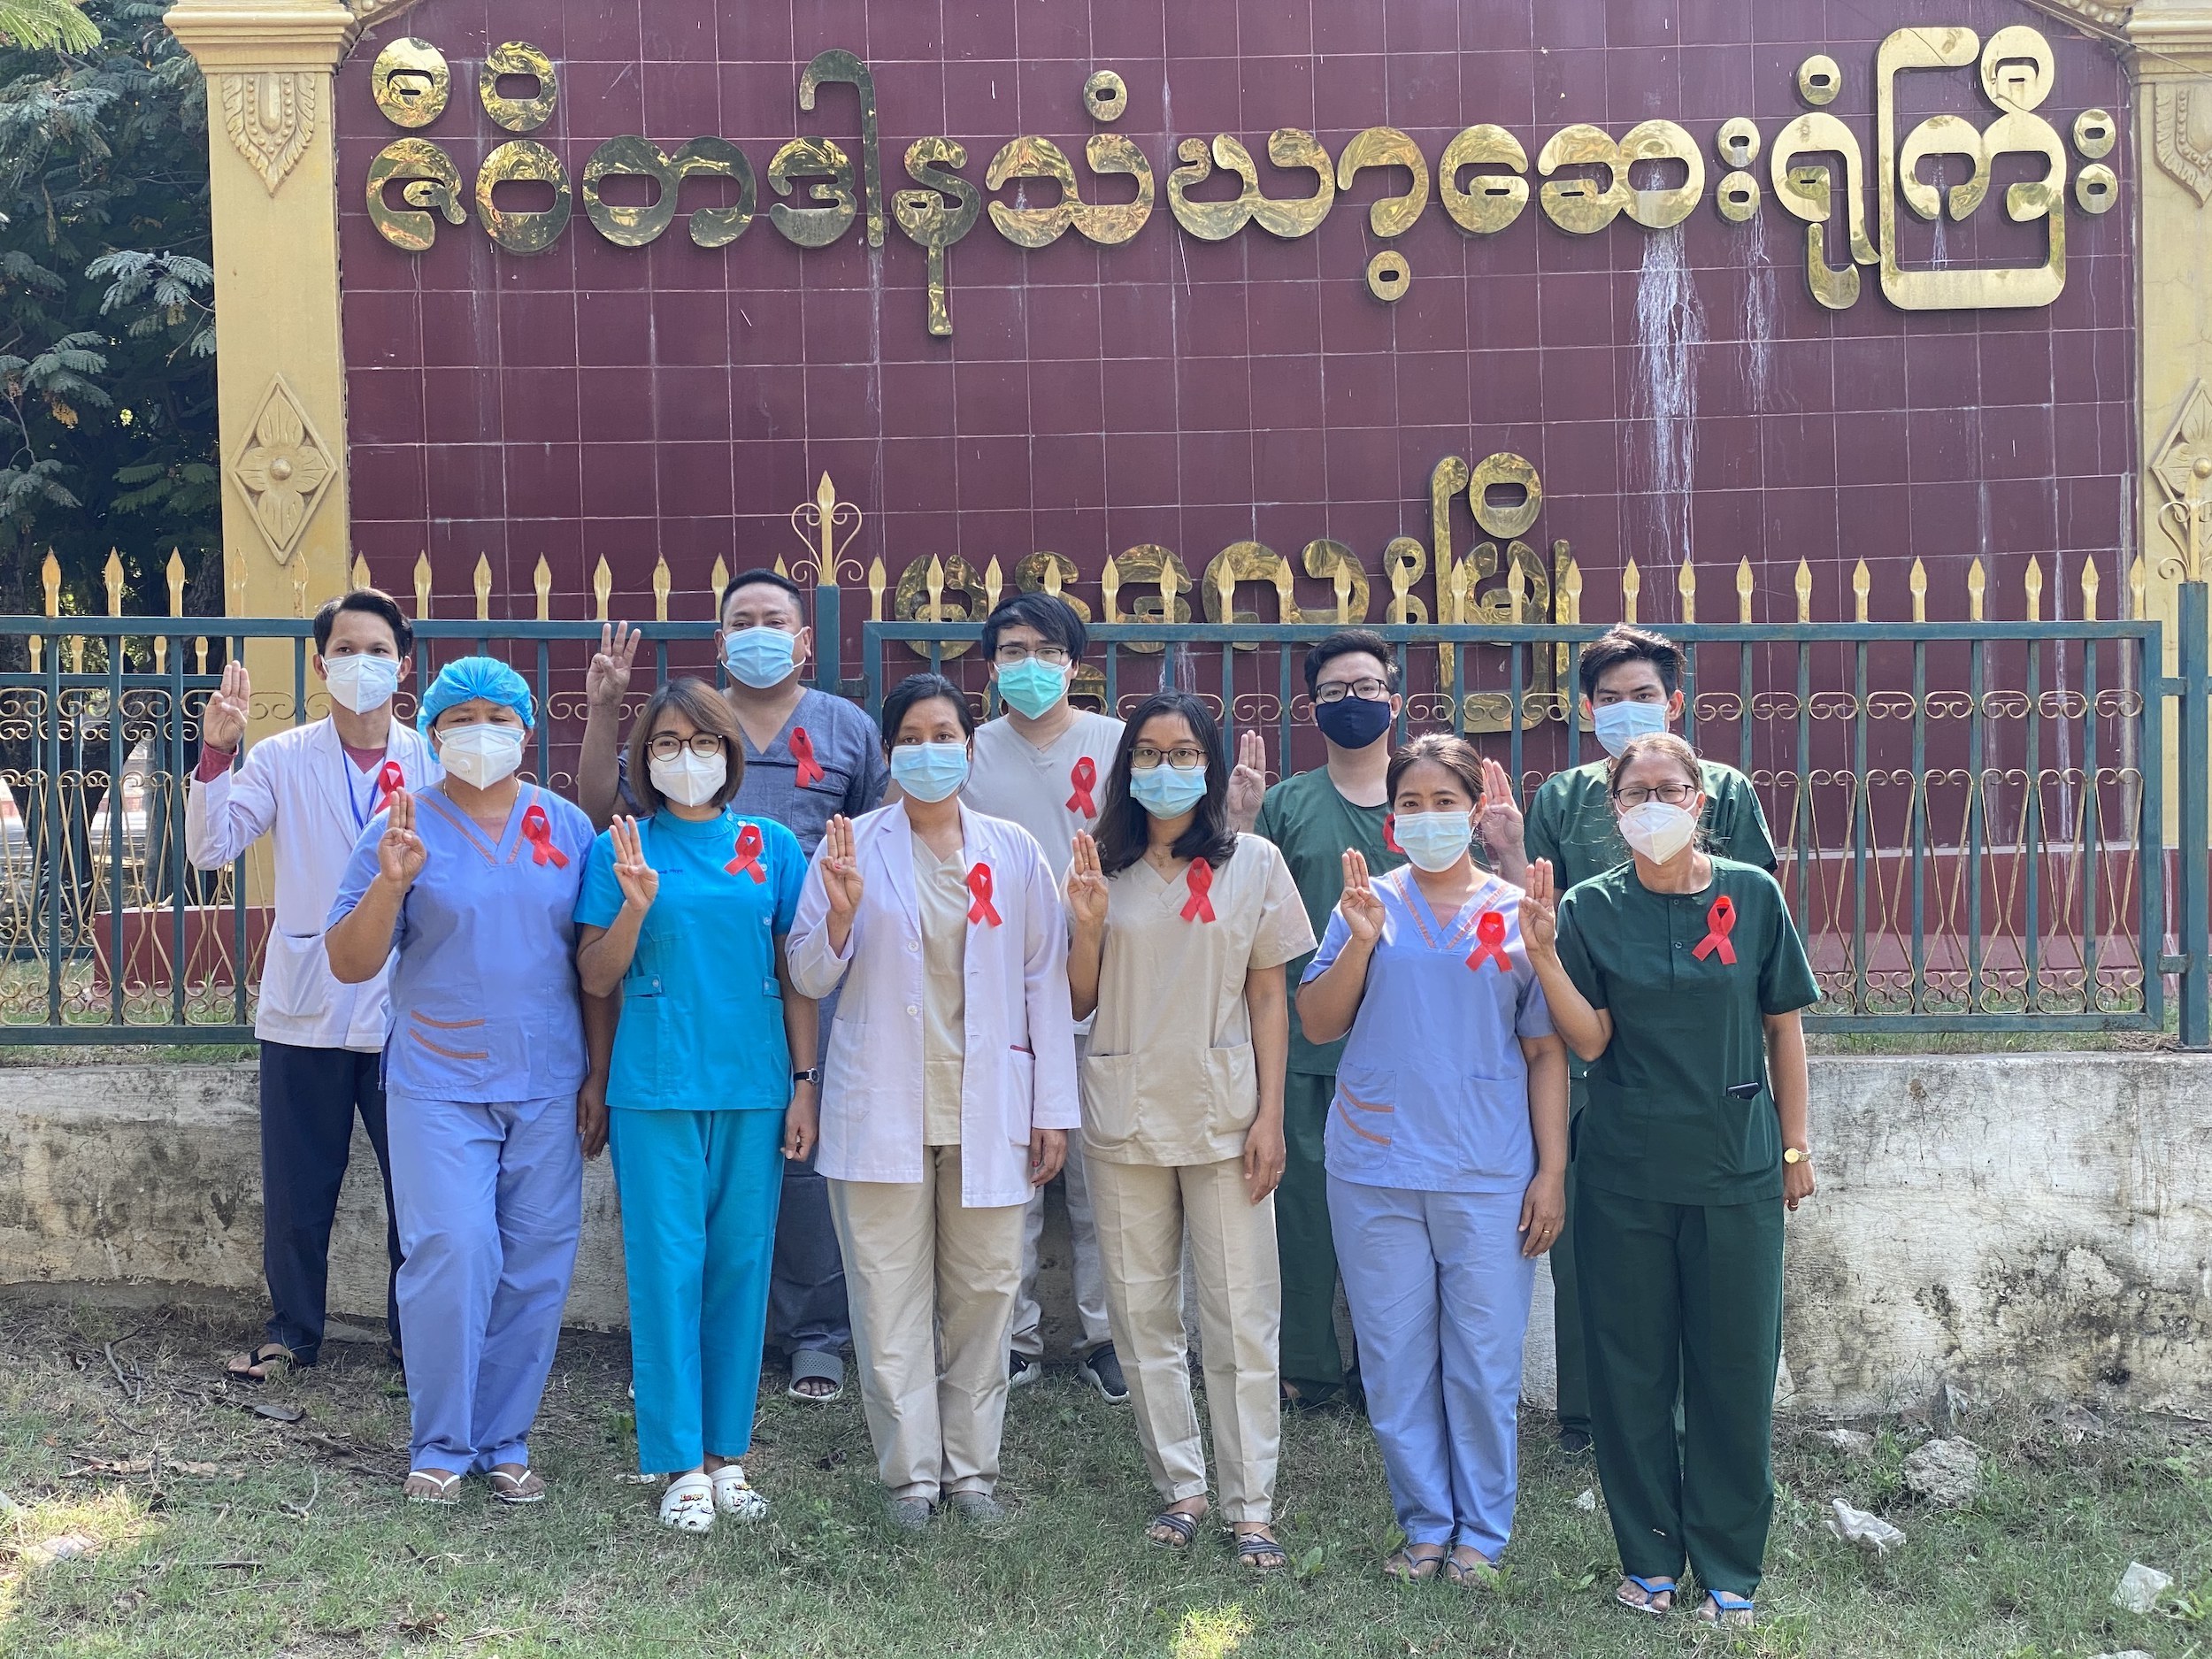 Medical workers in Mandalay join the Civil Disobedience Movement in protest of the military coup in February 2021 (Frontier)